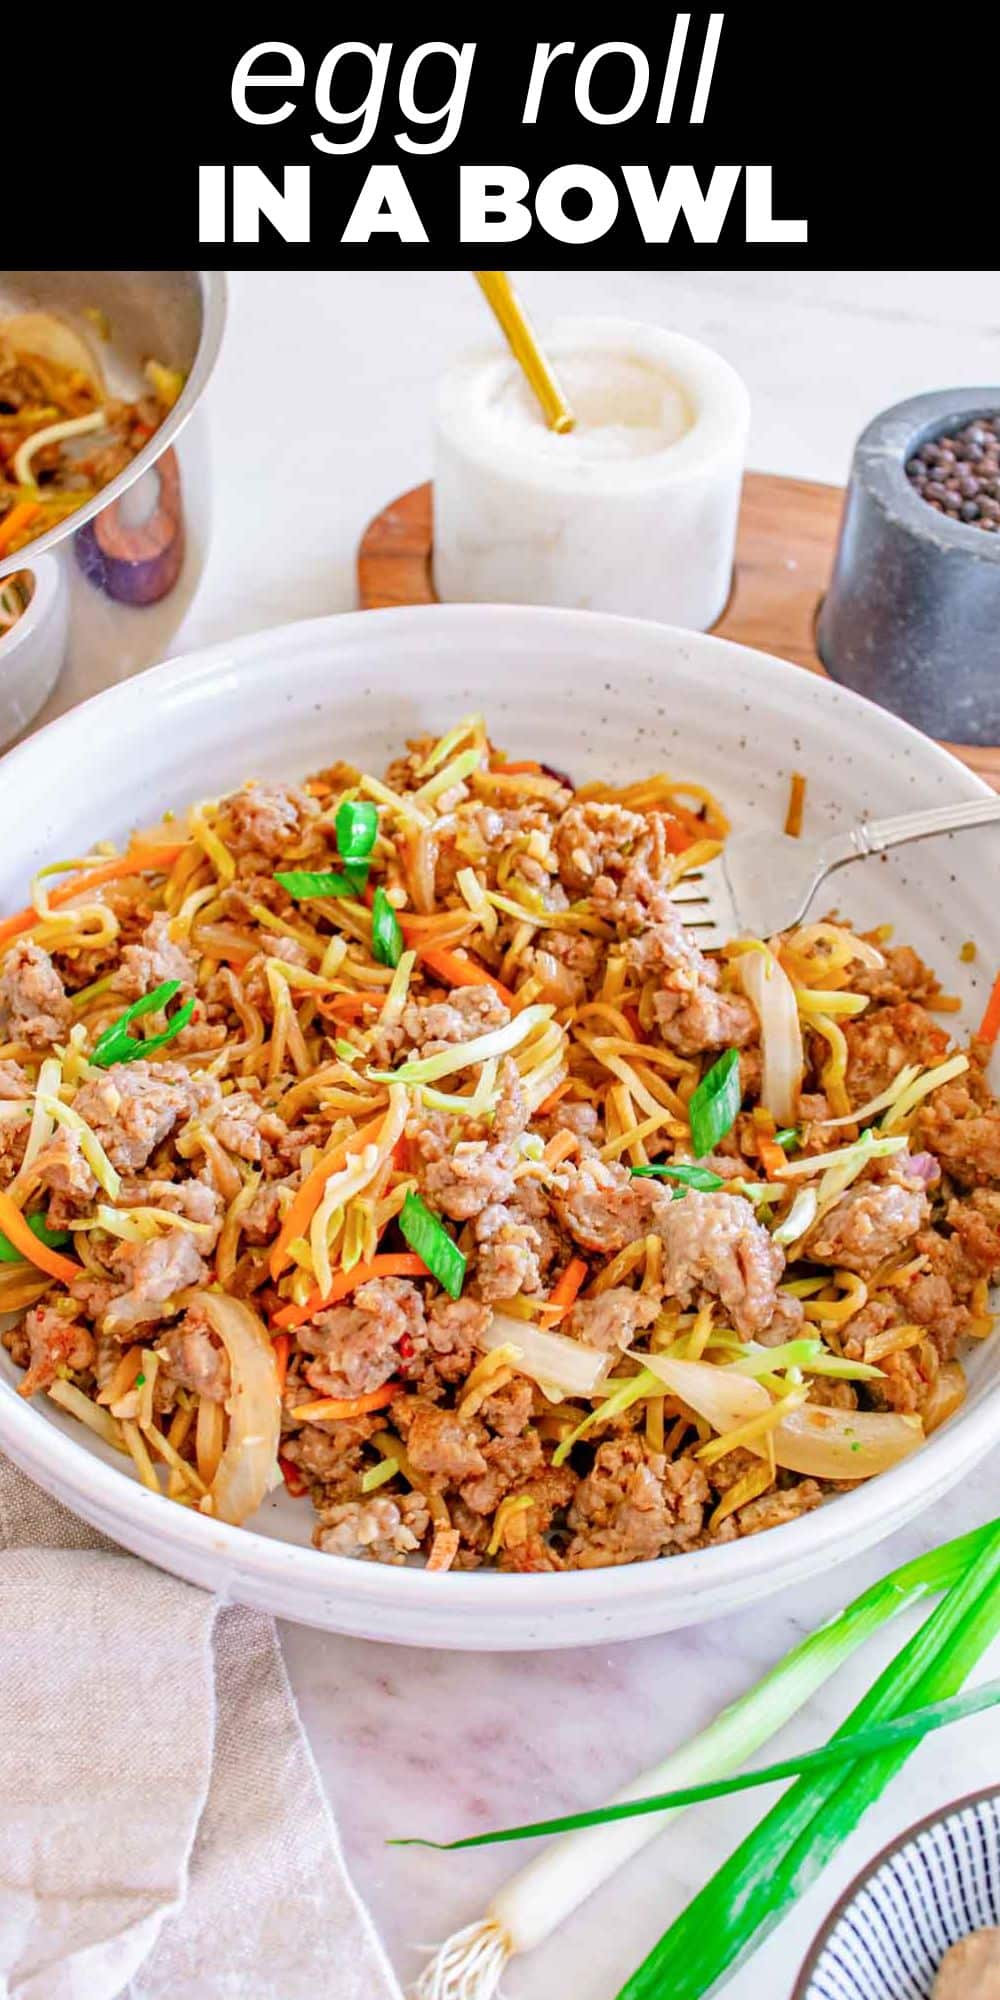 Egg roll in a bowl is a satisfying dish that captures the essence of the beloved egg roll.